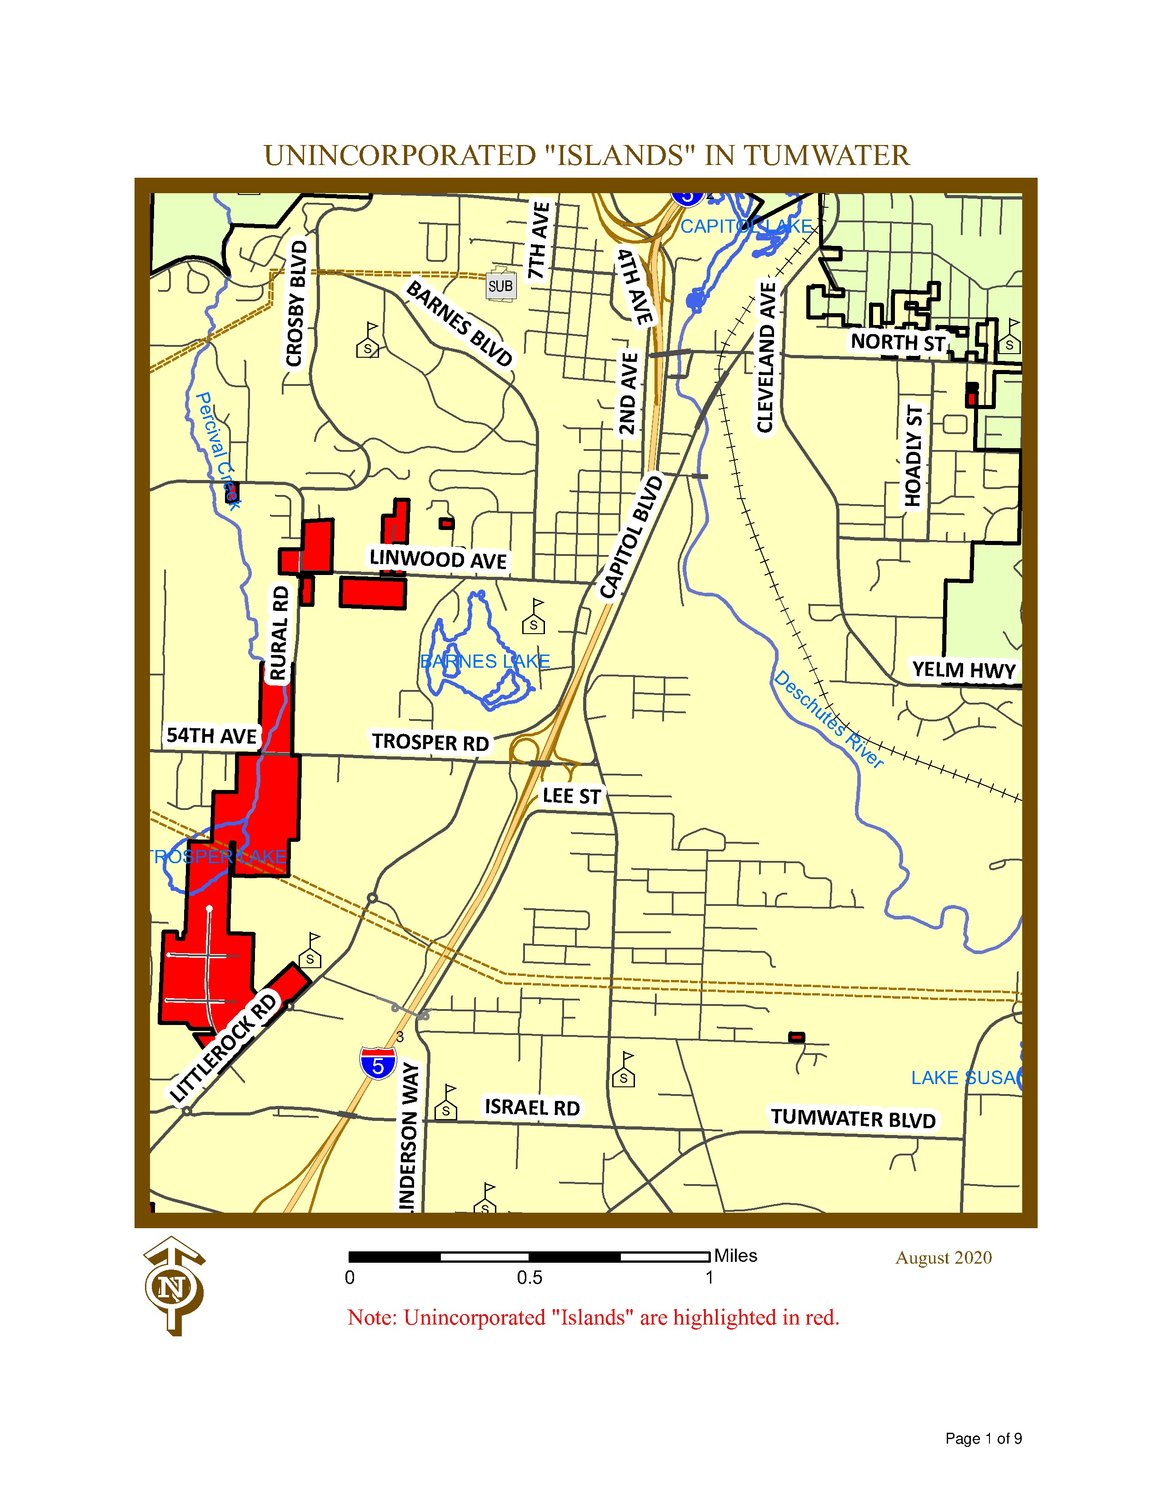 This is one of several detailed maps showing the islands to be annexed into Tumwater. See .pdf file for additional maps.